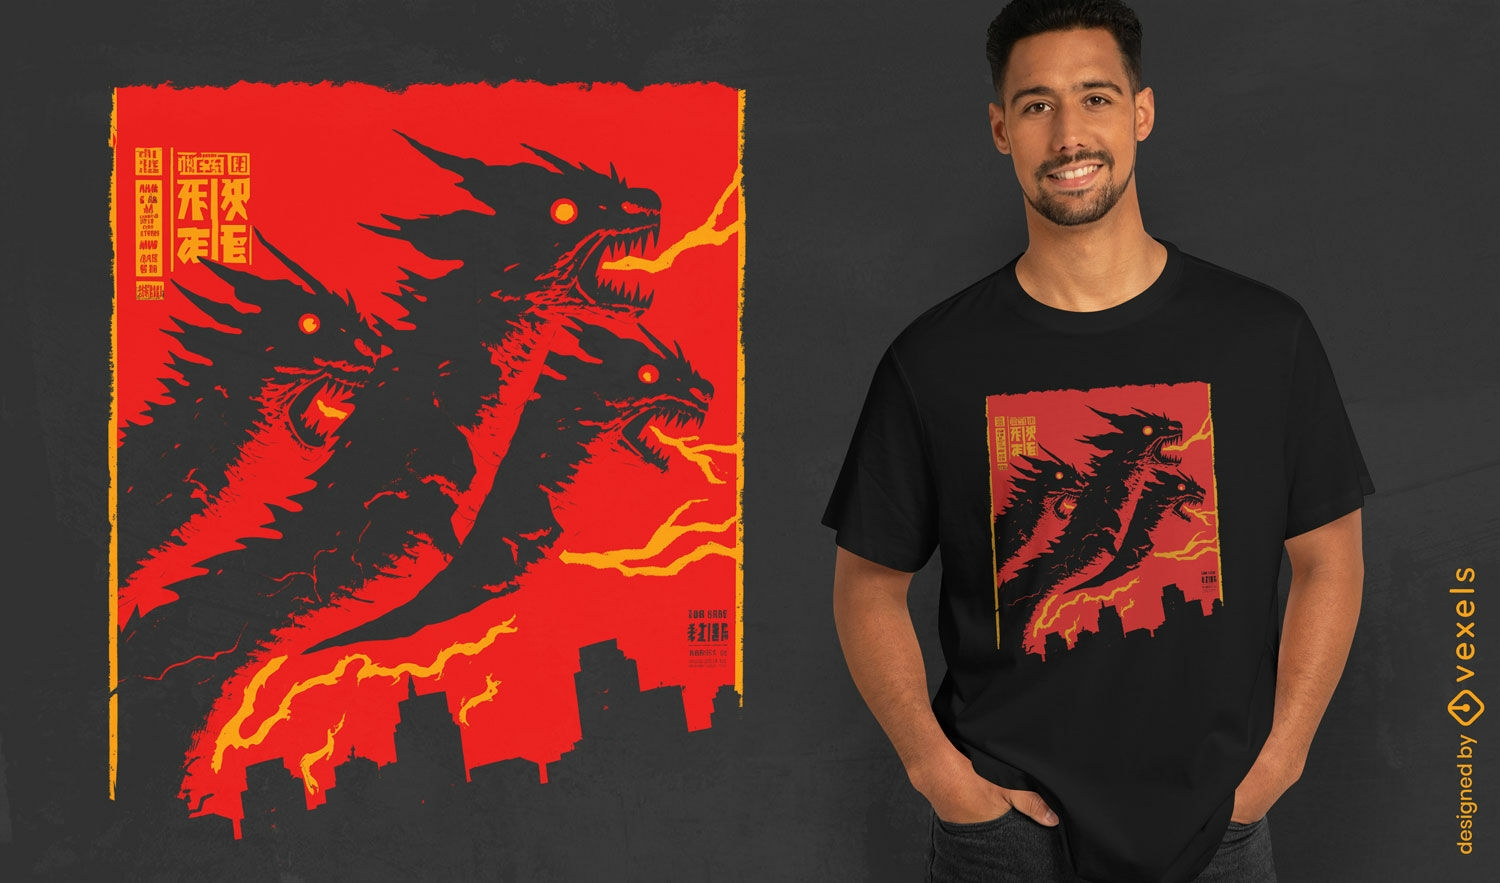 Mythical creature silhouette t-shirt design